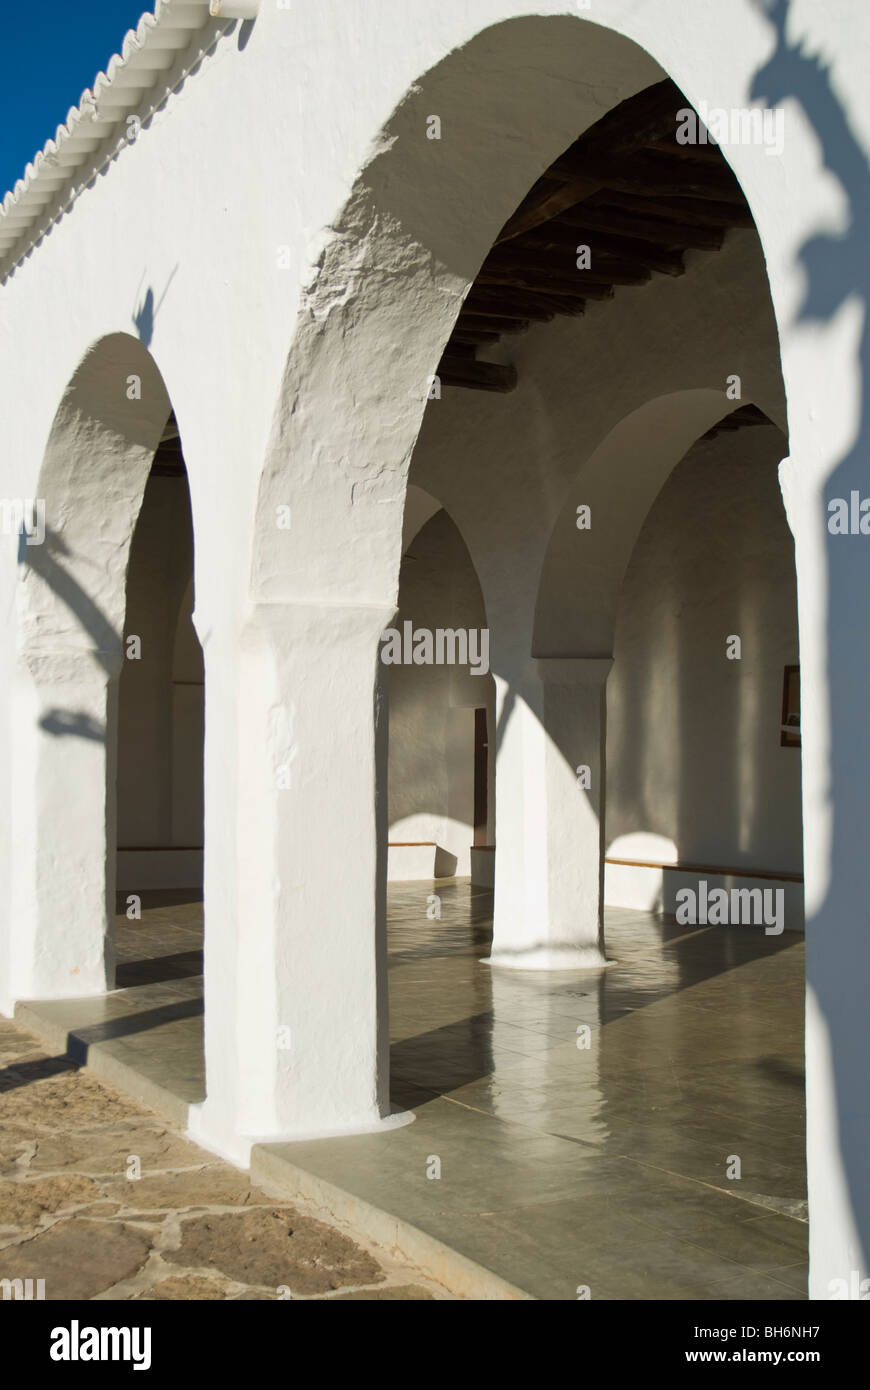 Detail view of arcade and courtyard of the Sant Carles de Peralta church, Ibiza, Spain Stock Photo